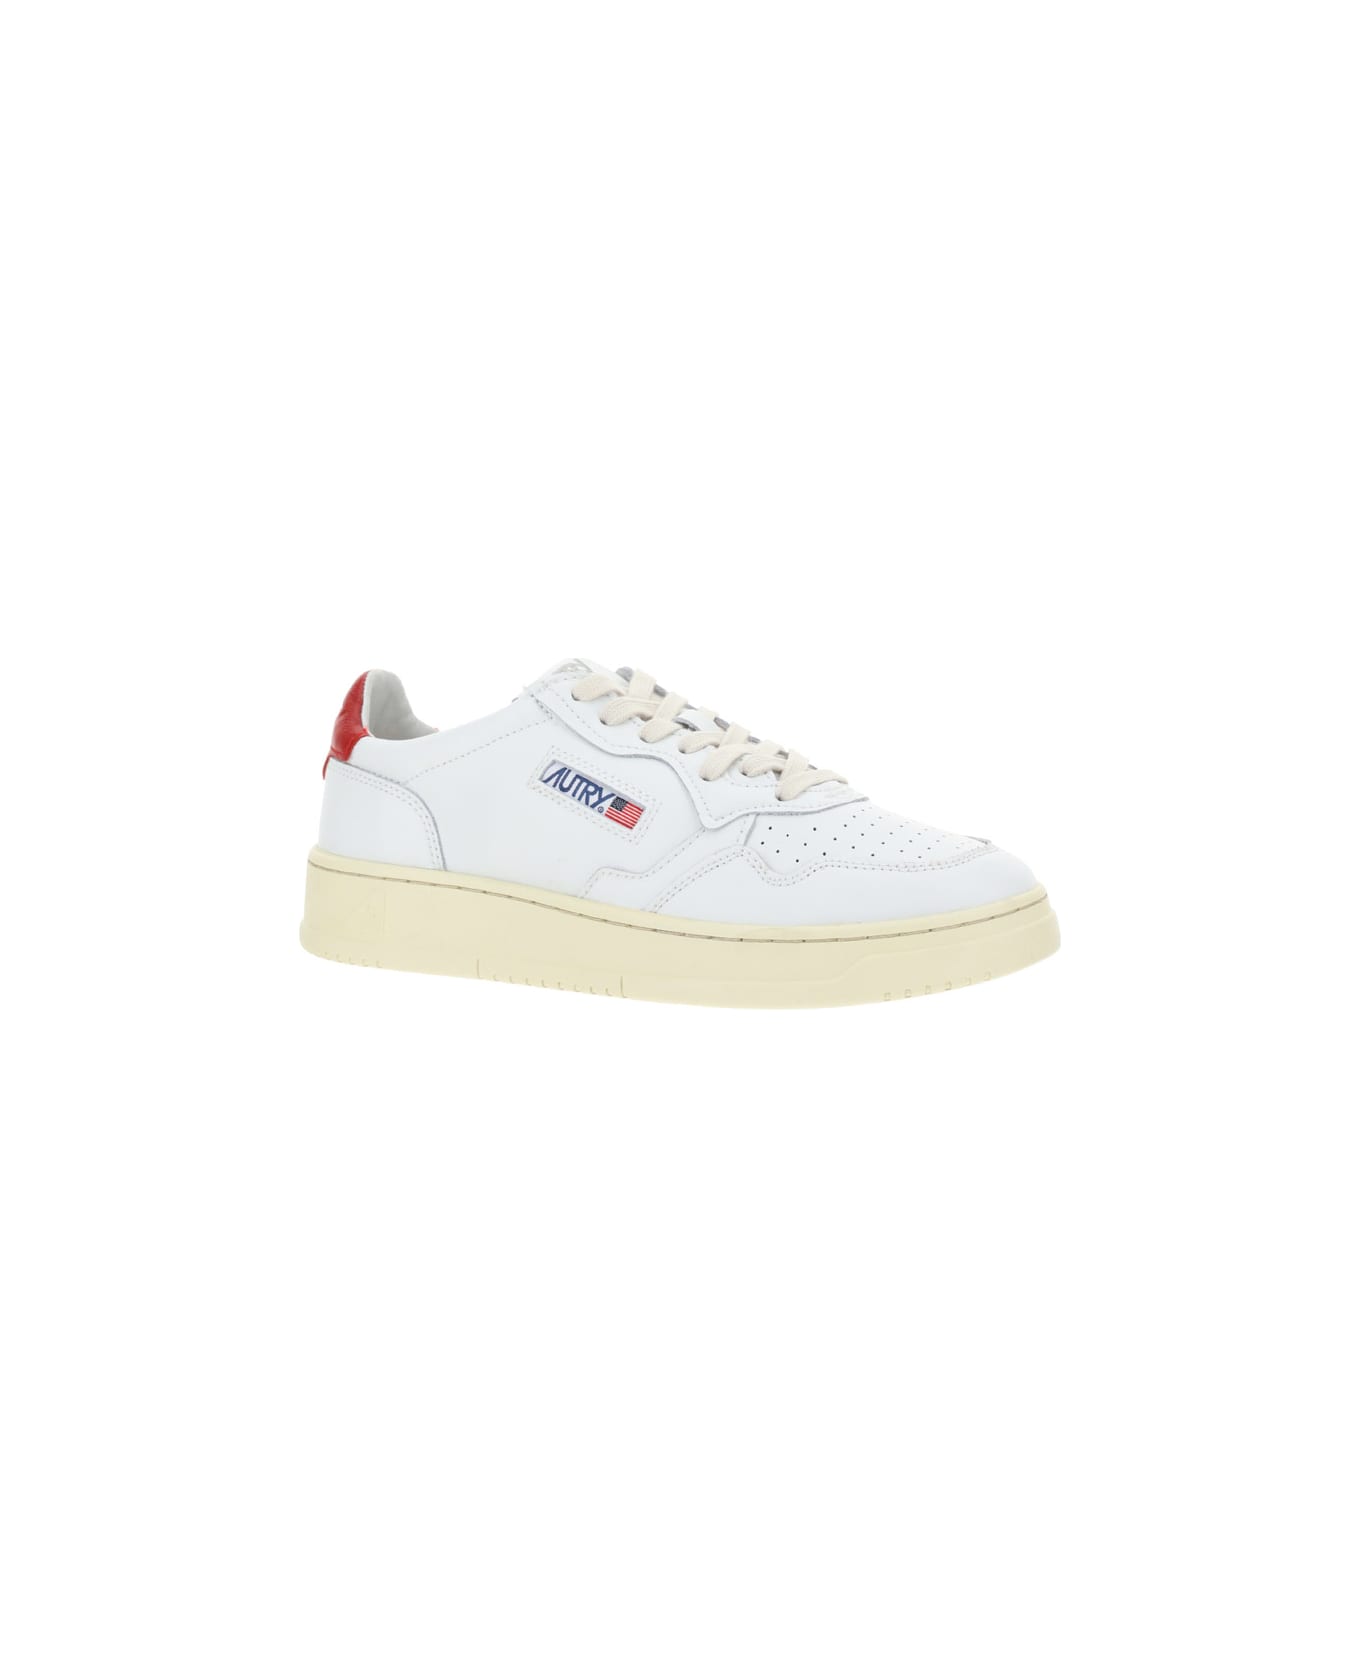 Autry Low 01 Sneakers - Wht/red